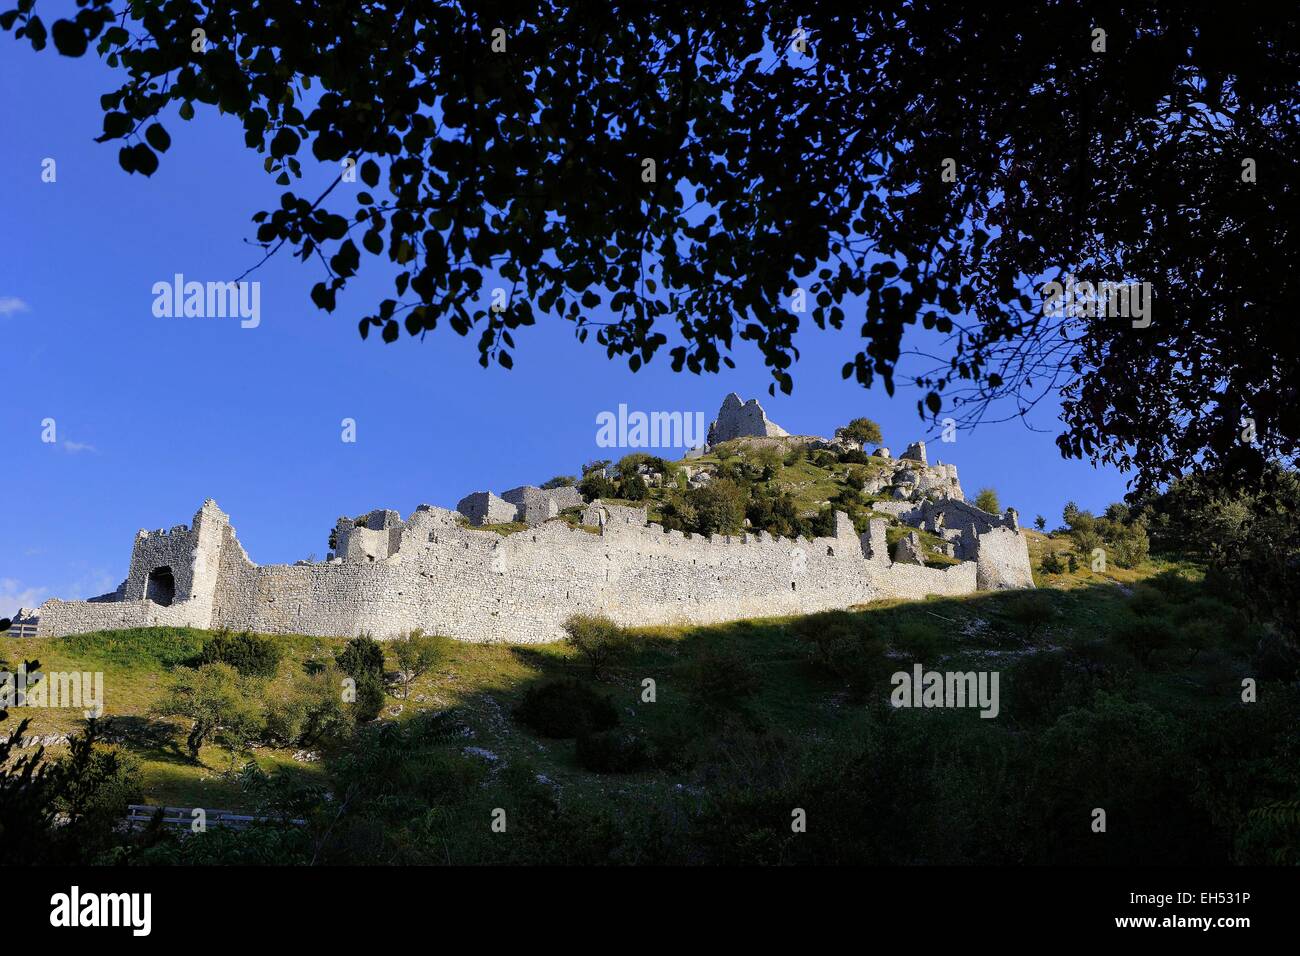 France, Ardeche, the Crussol castel, medieval fortress of the early 12th century, located in the municipality of Saint Peray Stock Photo